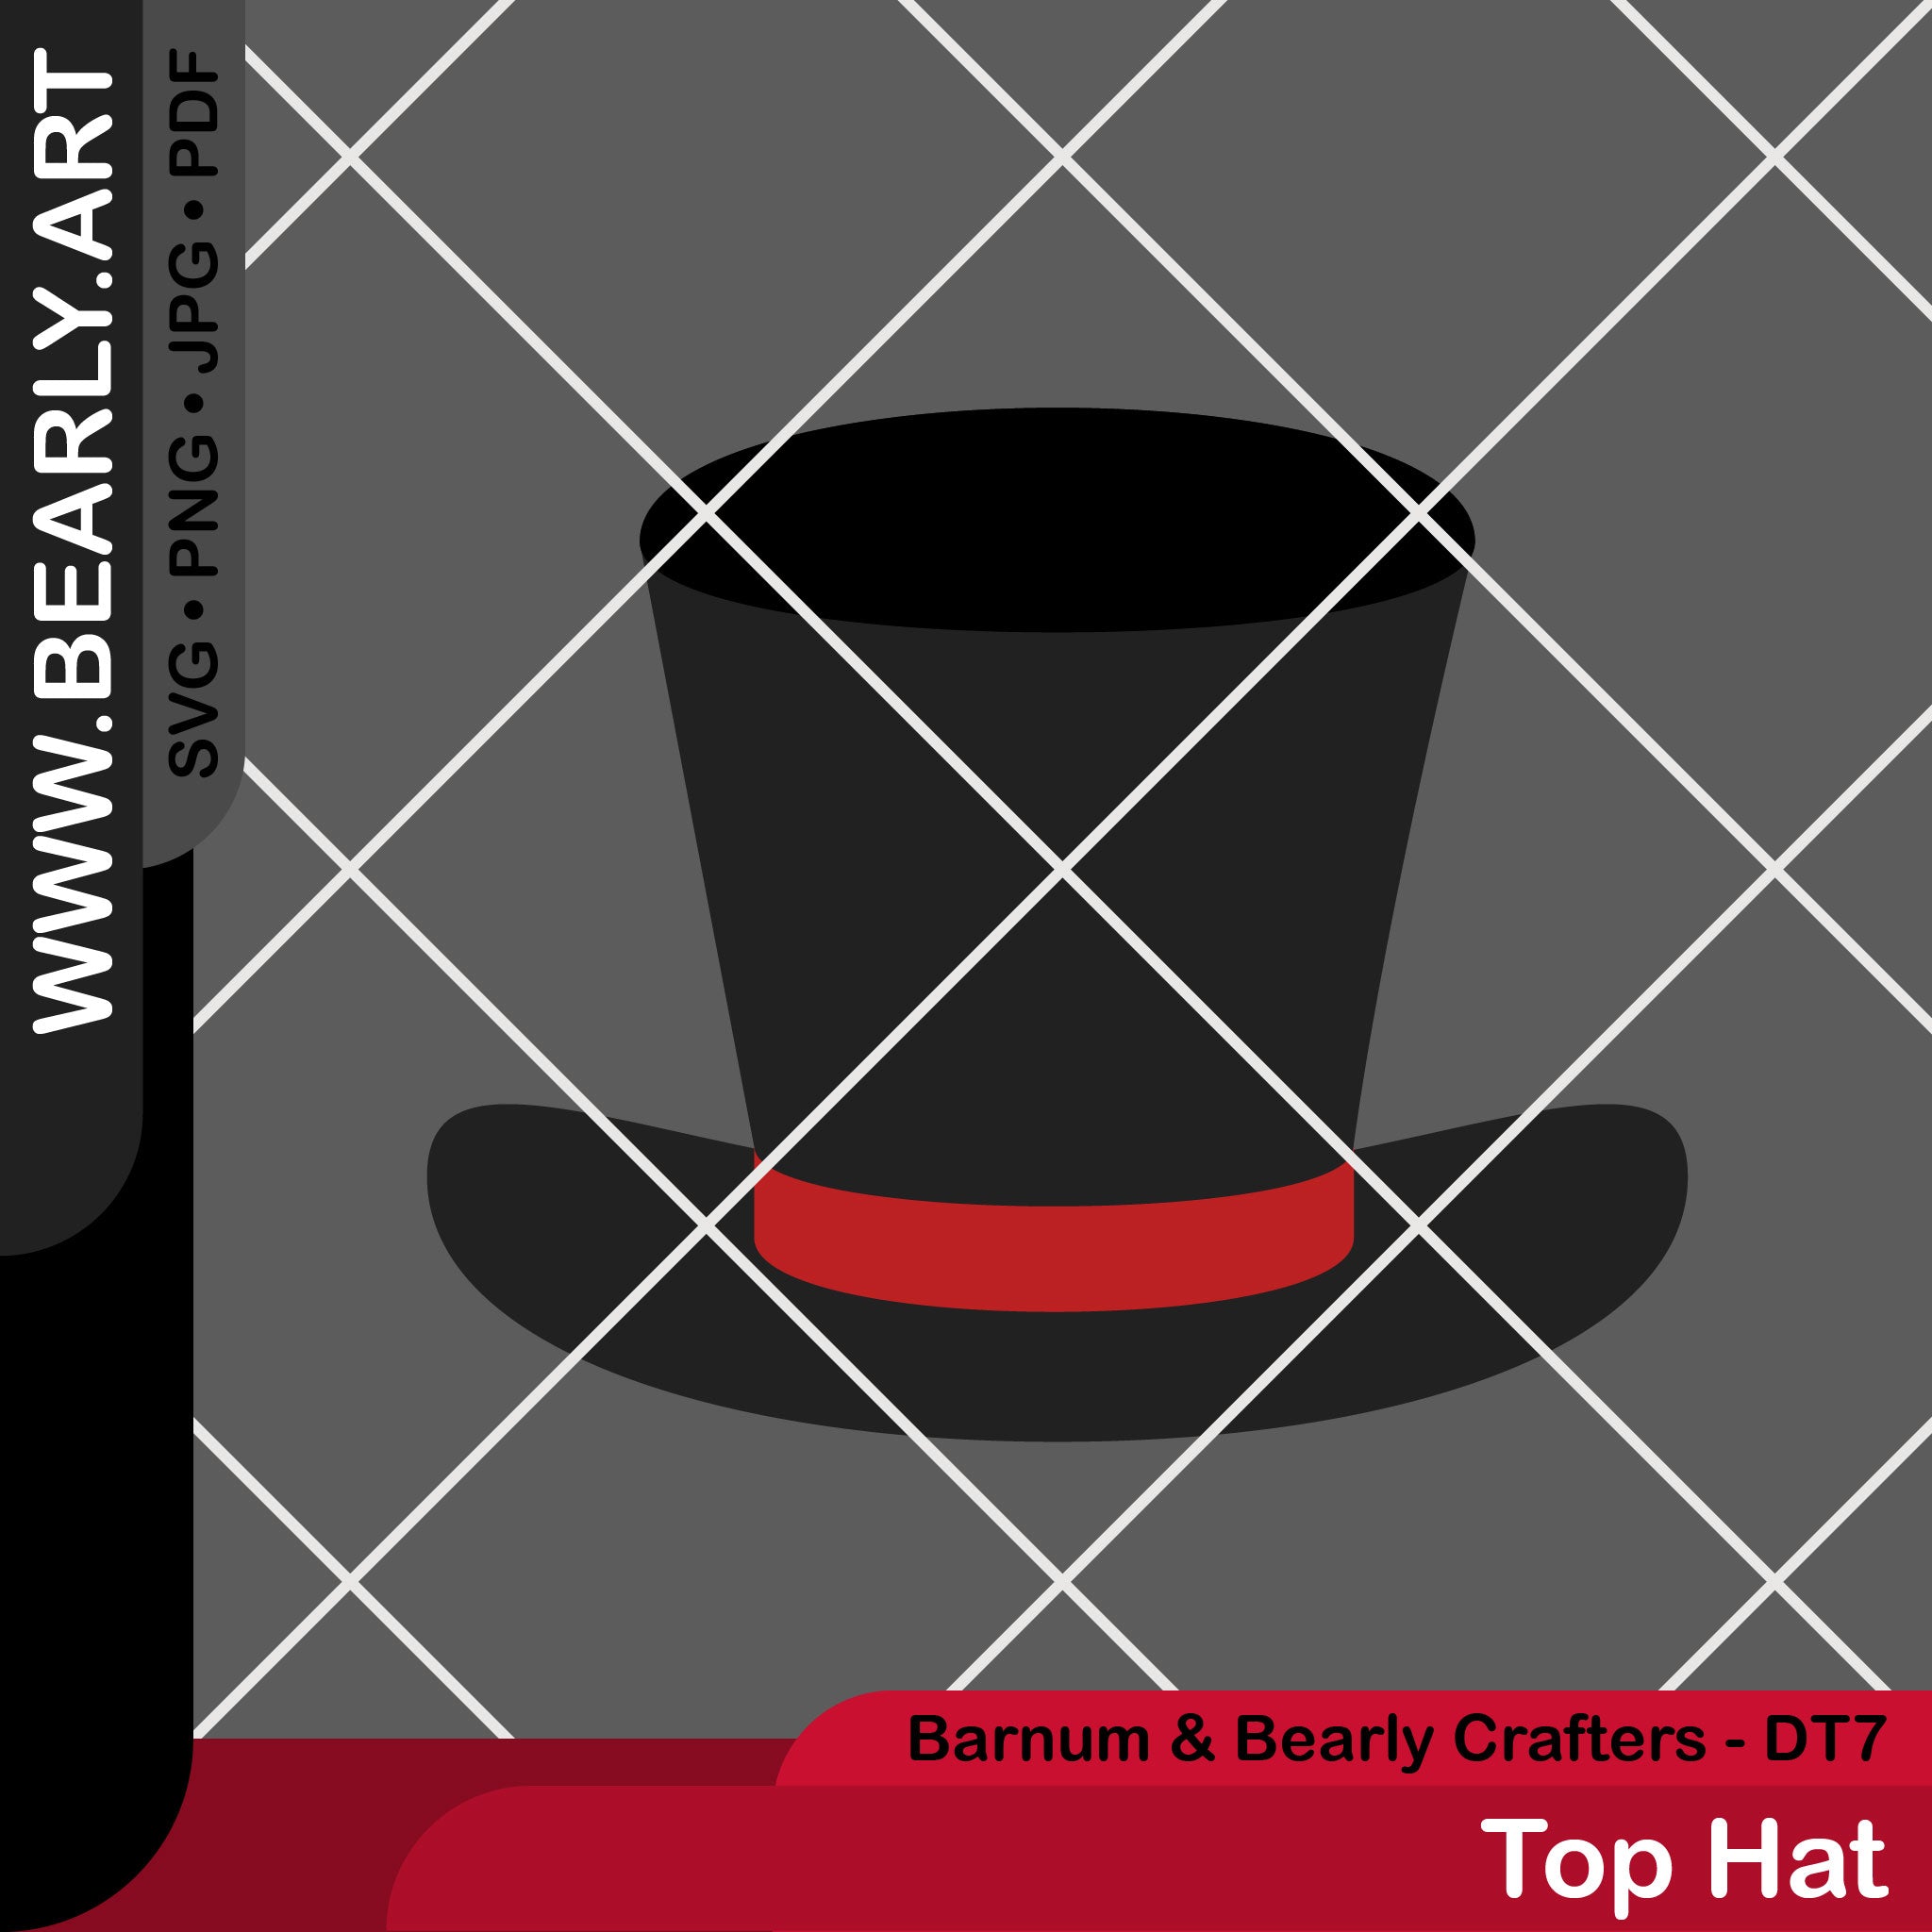 Top Hat - Design Team 7 - Barnum & Bearly Crafters